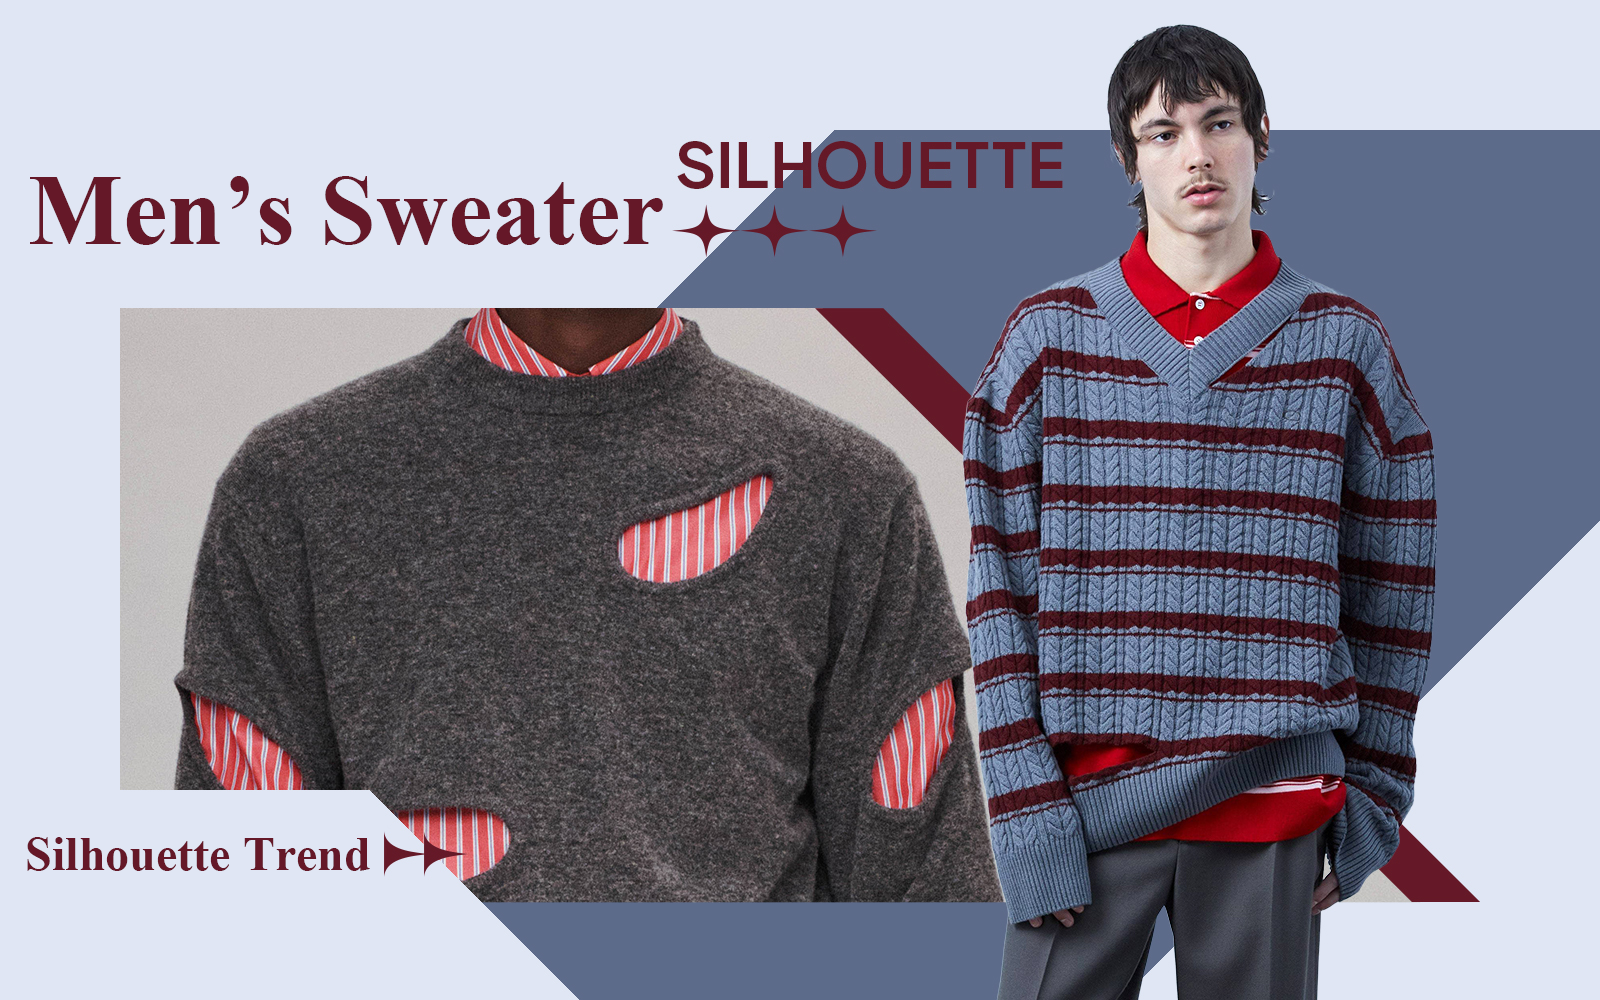 Fashion Sweater -- The Silhouette Trend for Men's Knitwear